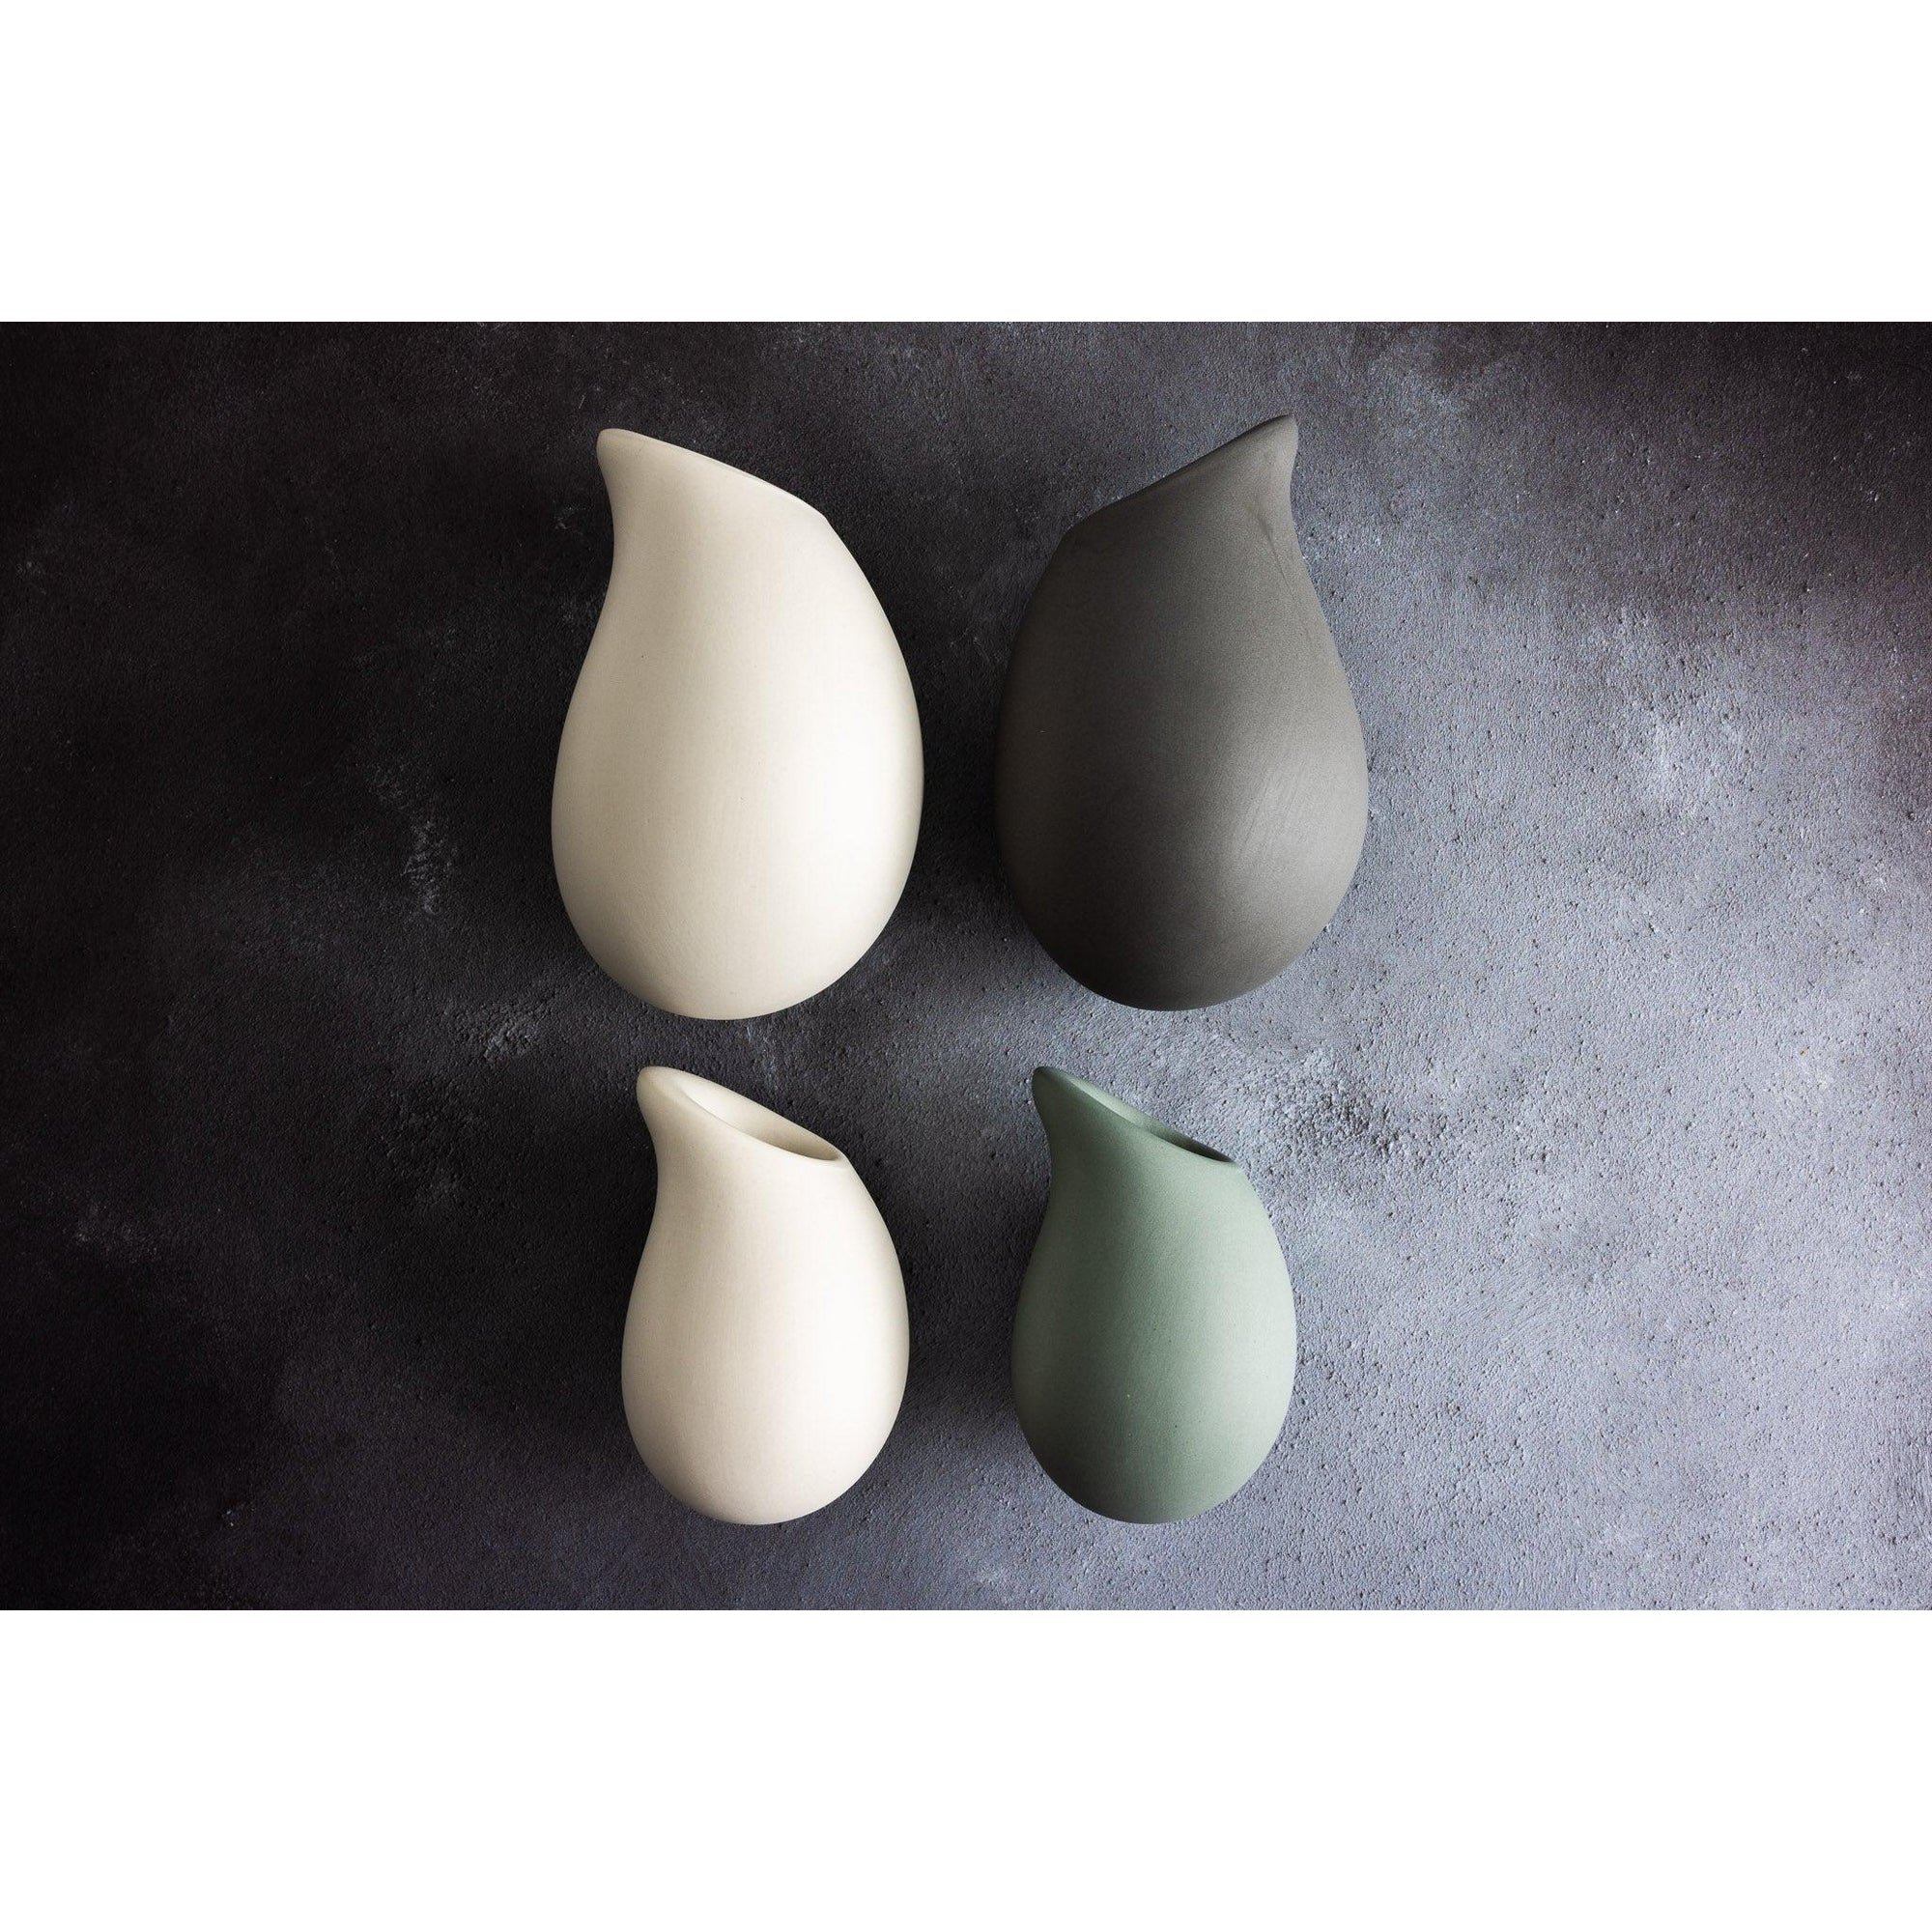 KSP2 Droplet Wall Vase by Kate Schuricht, available at Padstow Gallery, Cornwall